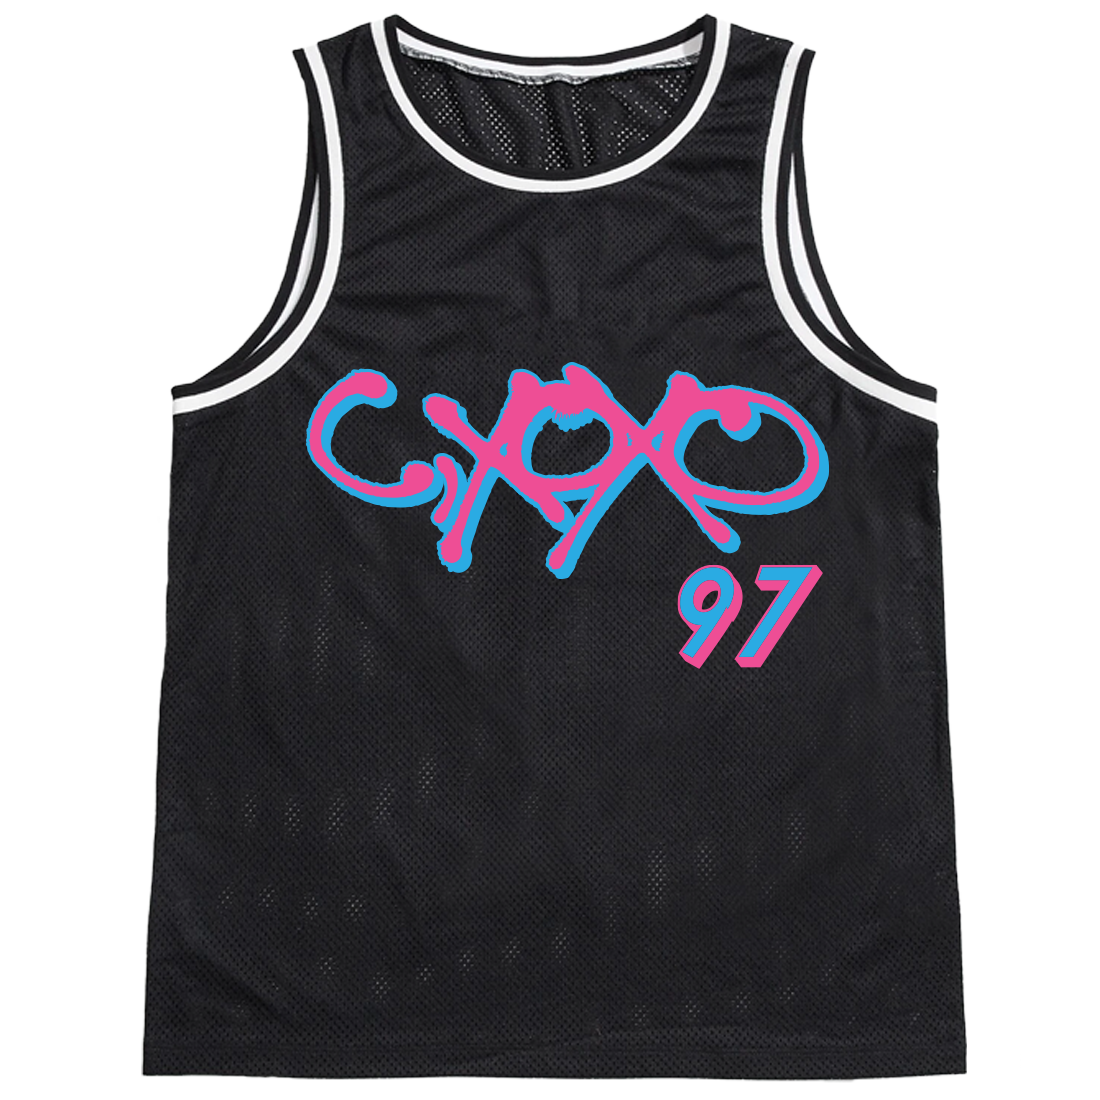 C,XOXO I LUV IT JERSEY FRONT